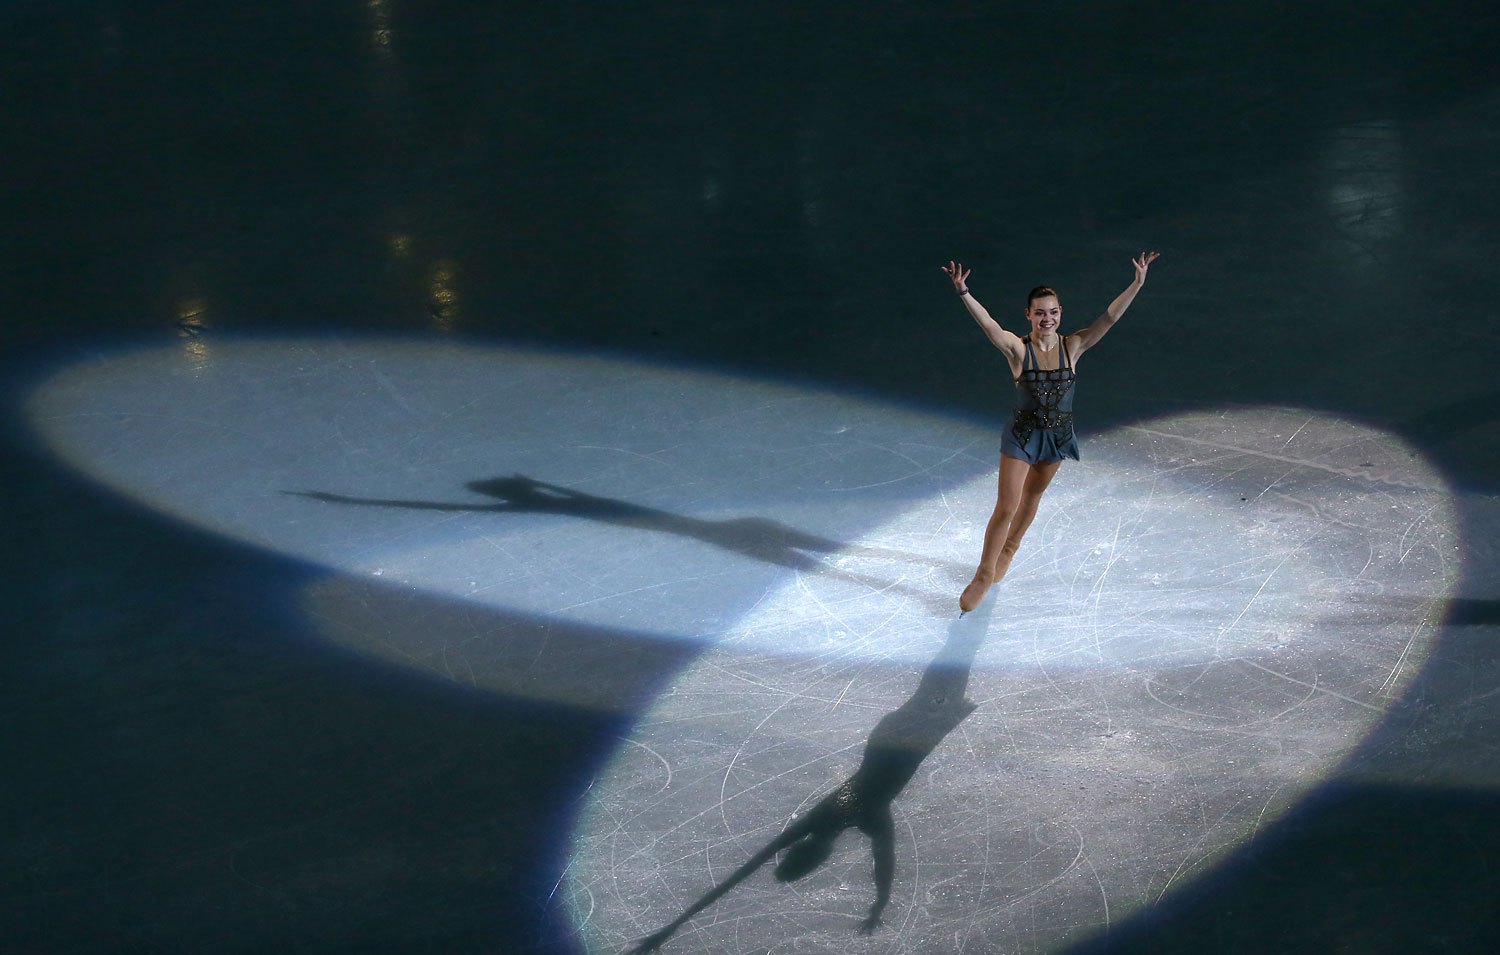 Gold medalist Adelina Sotnikova of Russia celebrates during the flower ceremony after the Women's Free Skating Figure Skating event at Iceberg Skating Palace.